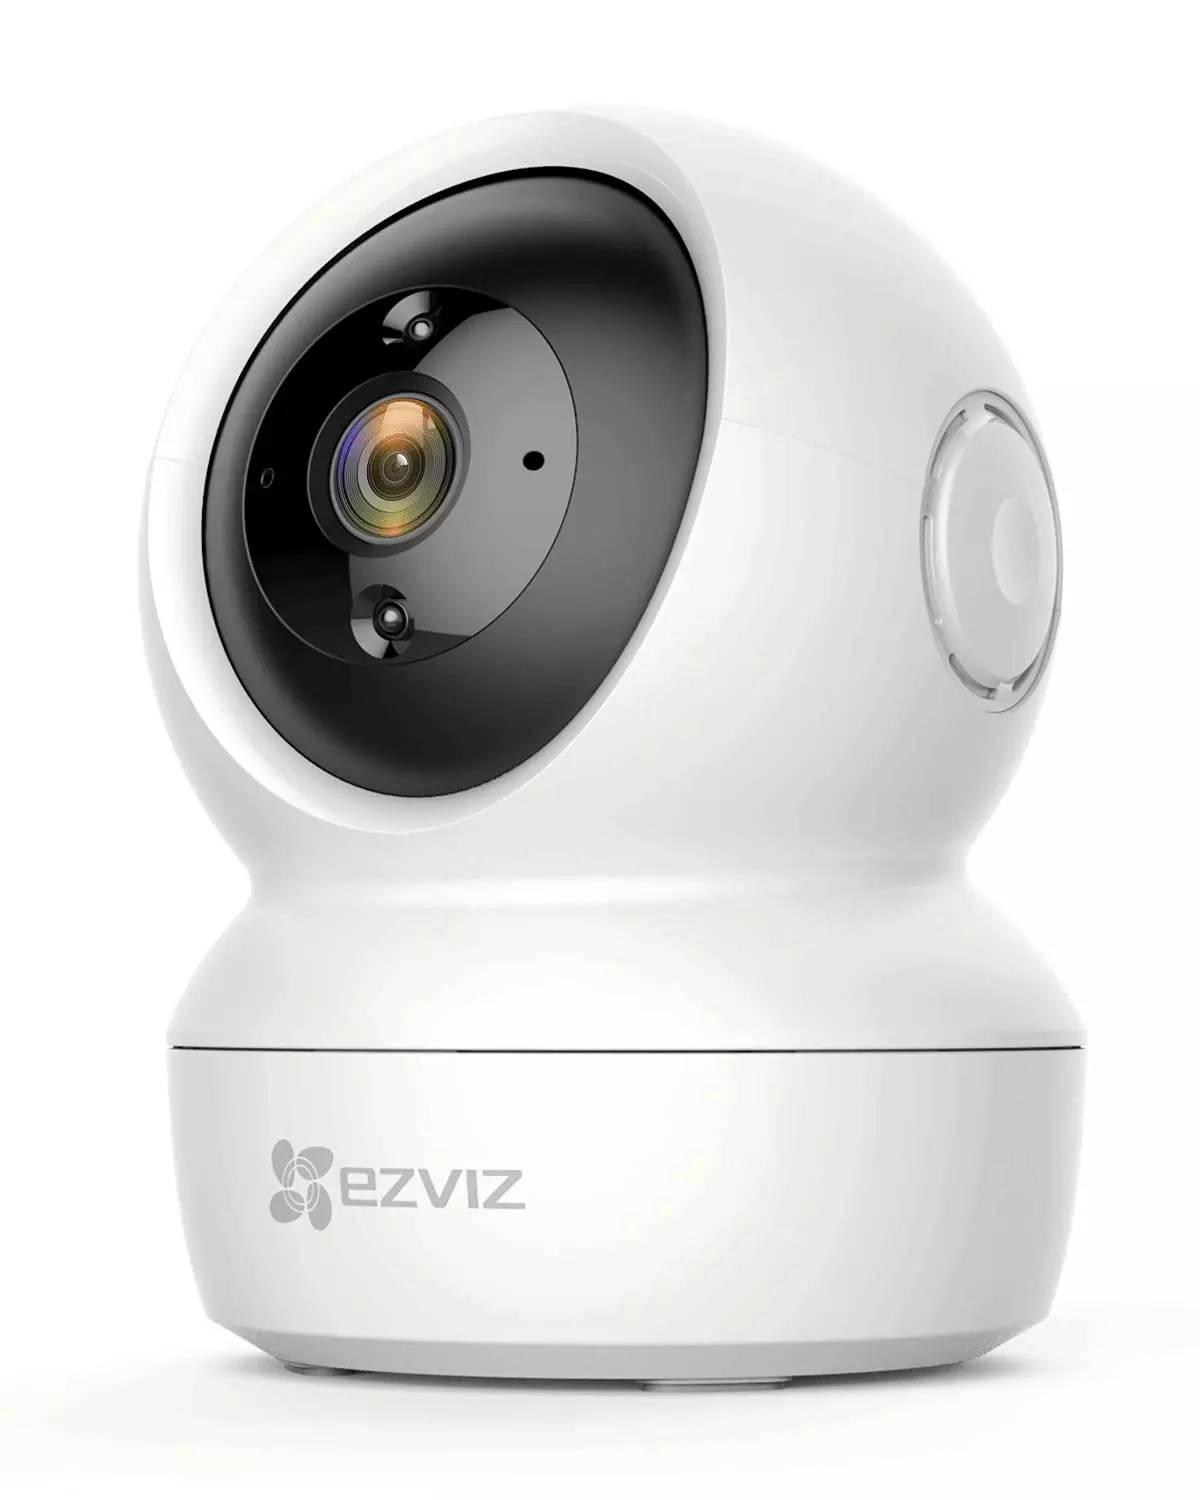 cctv camera: Best CCTV Cameras for Home & Office Security in India